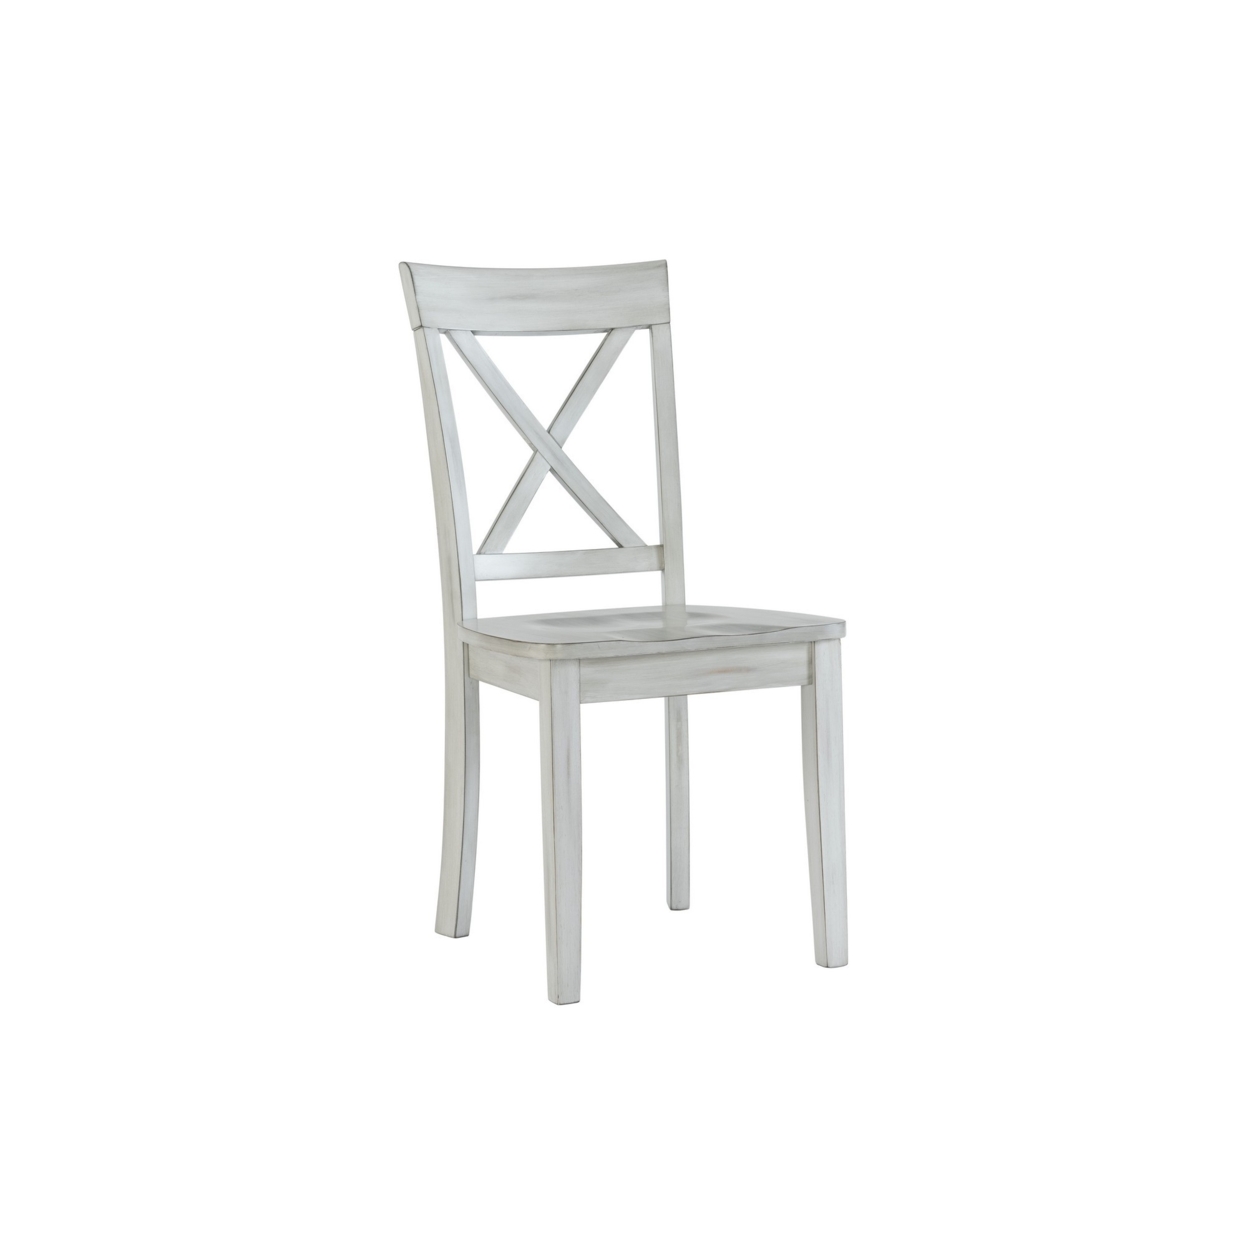 Wooden Dining Chair With X Shaped Back, Set Of 2, White- Saltoro Sherpi